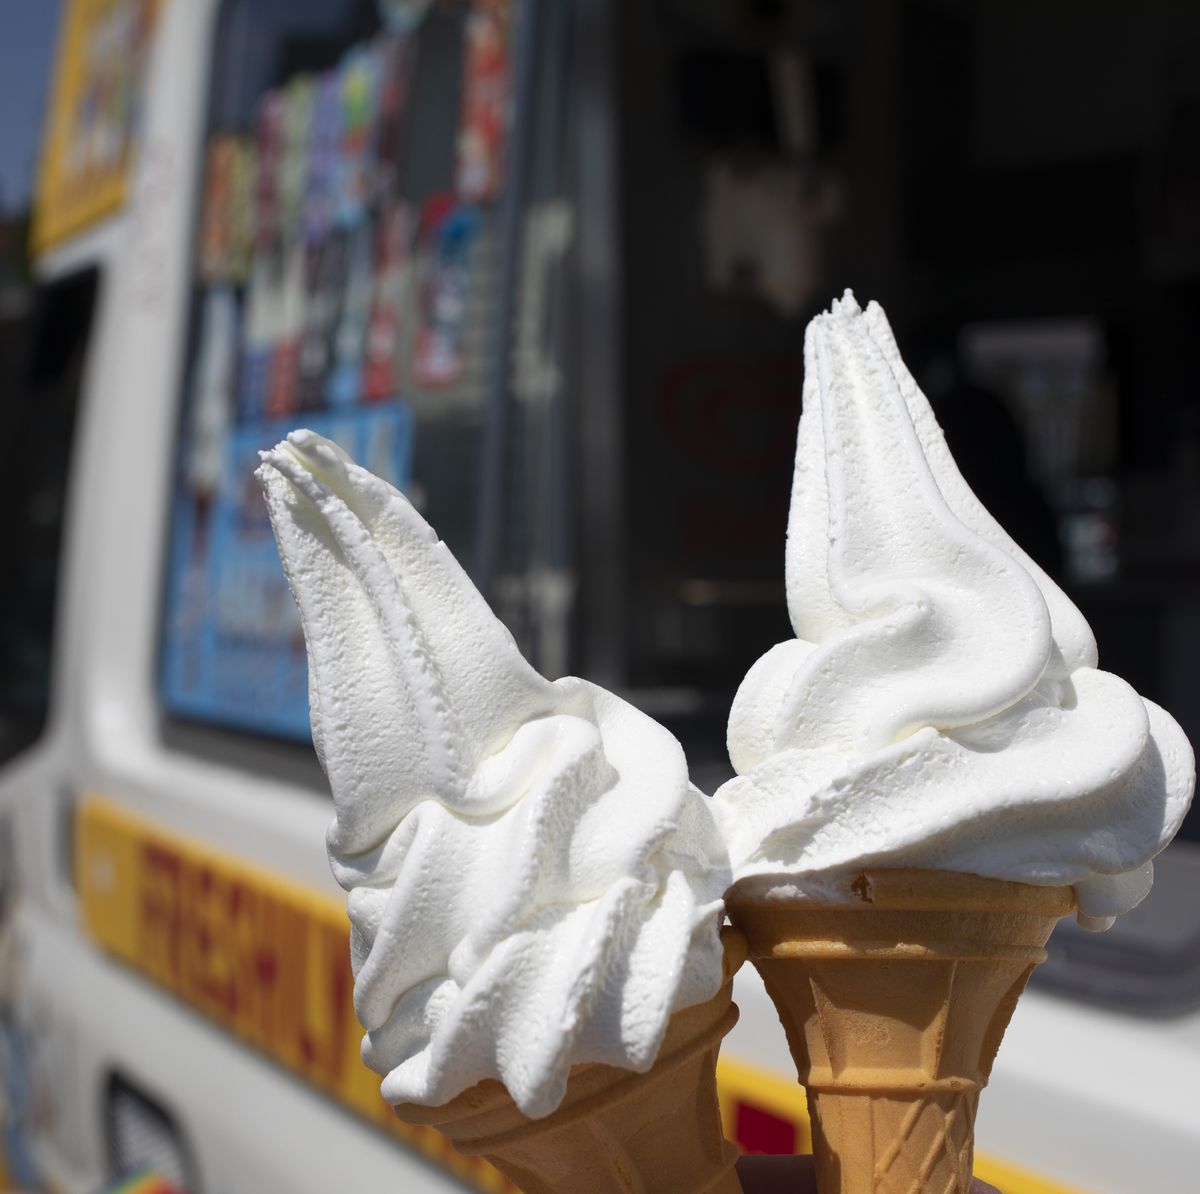 5 Reasons You Should Never Eat Soft Serve Ice Cream